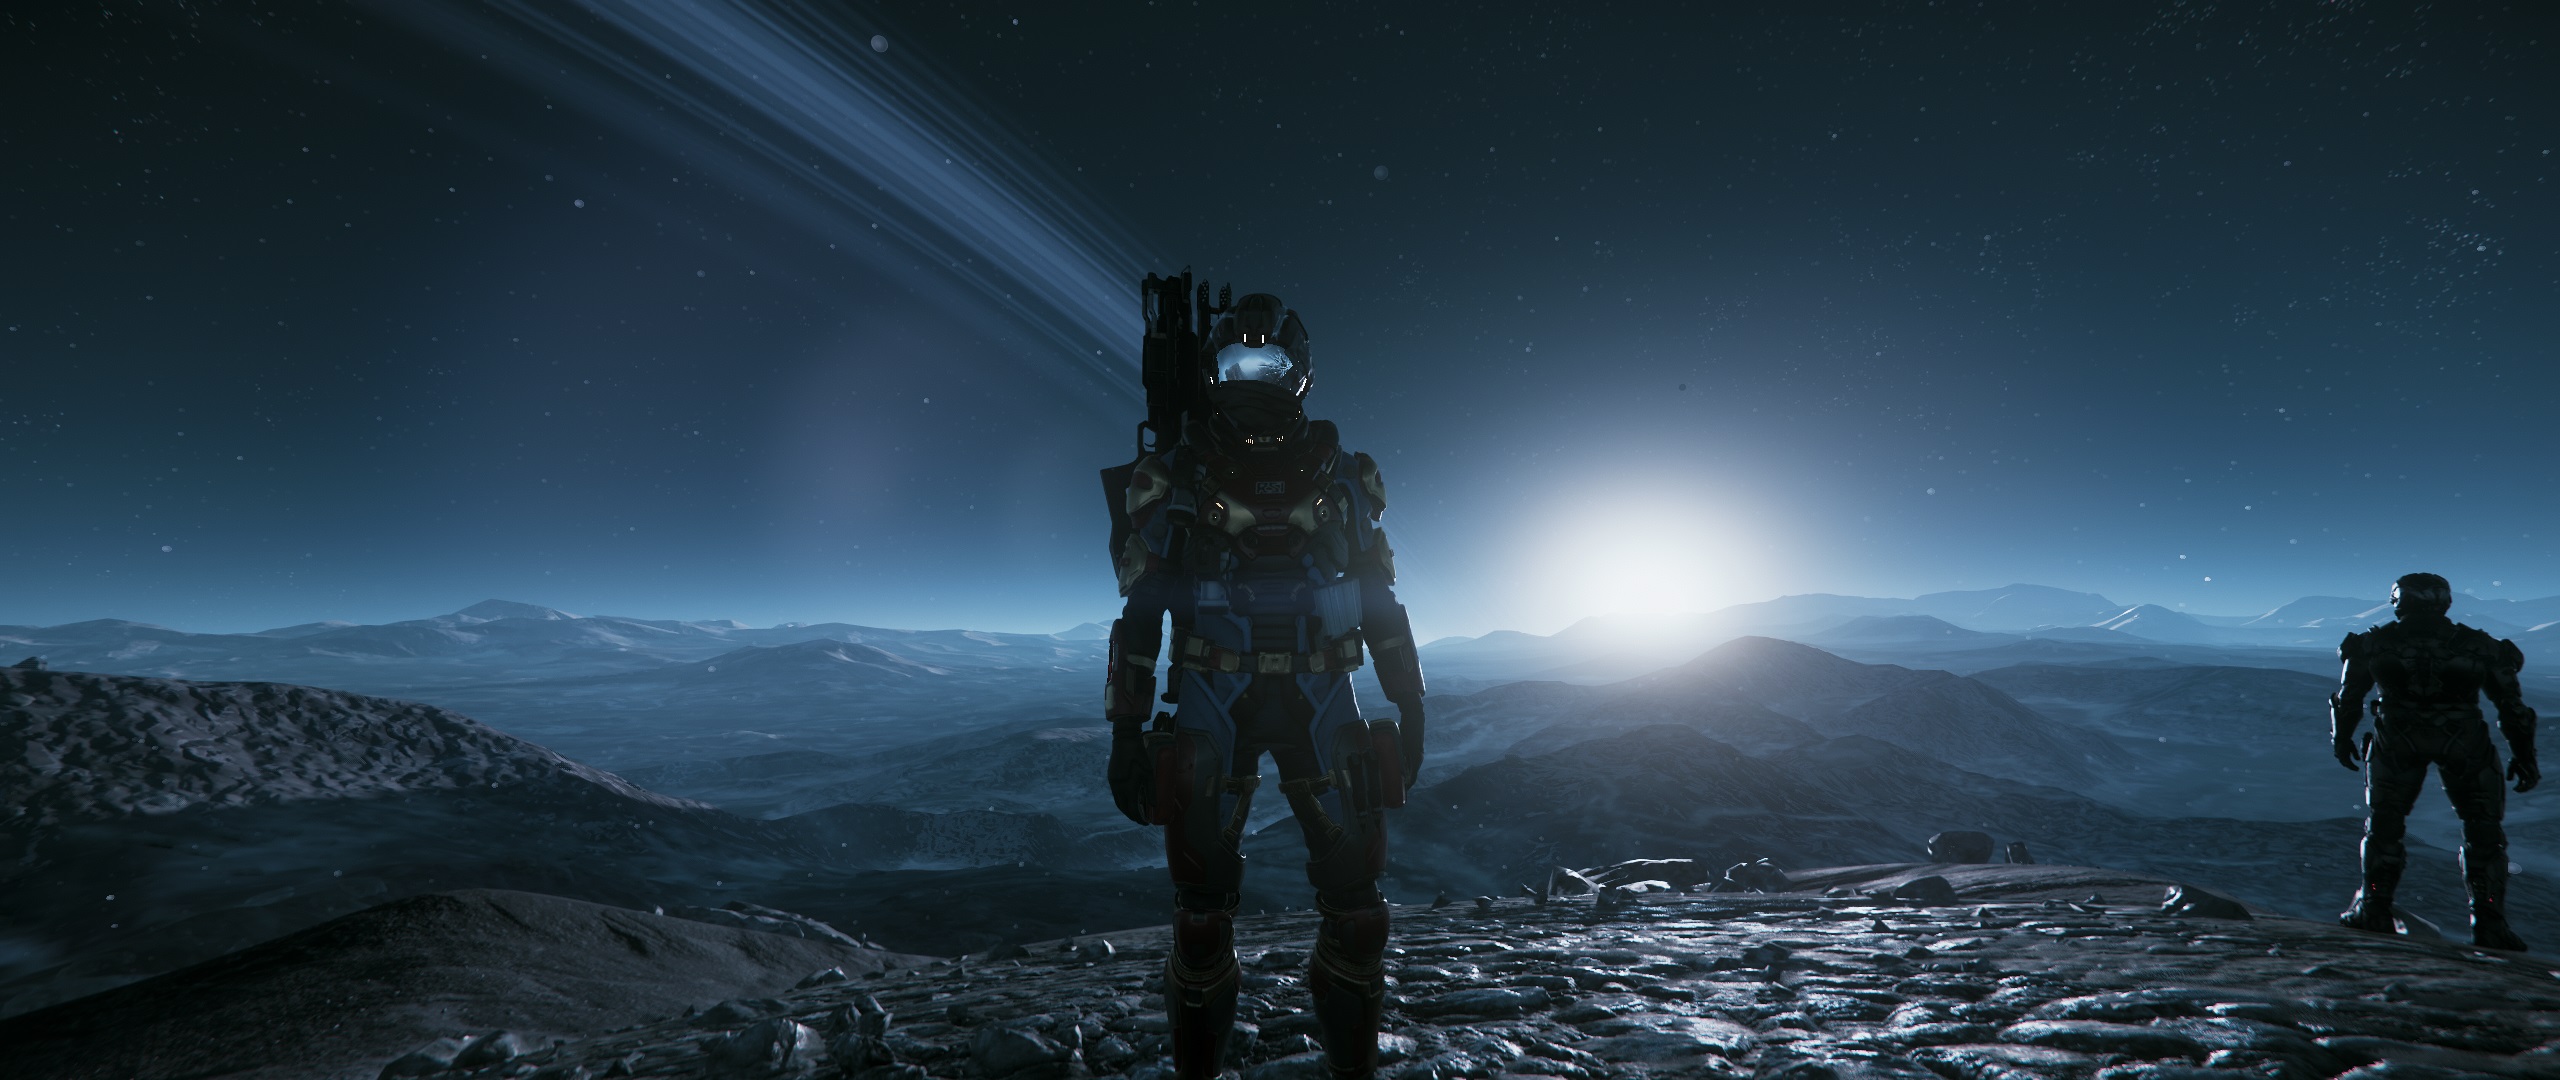 Squadron 42 – Star Citizen Screenshot  – .68 | Massively  Overpowered